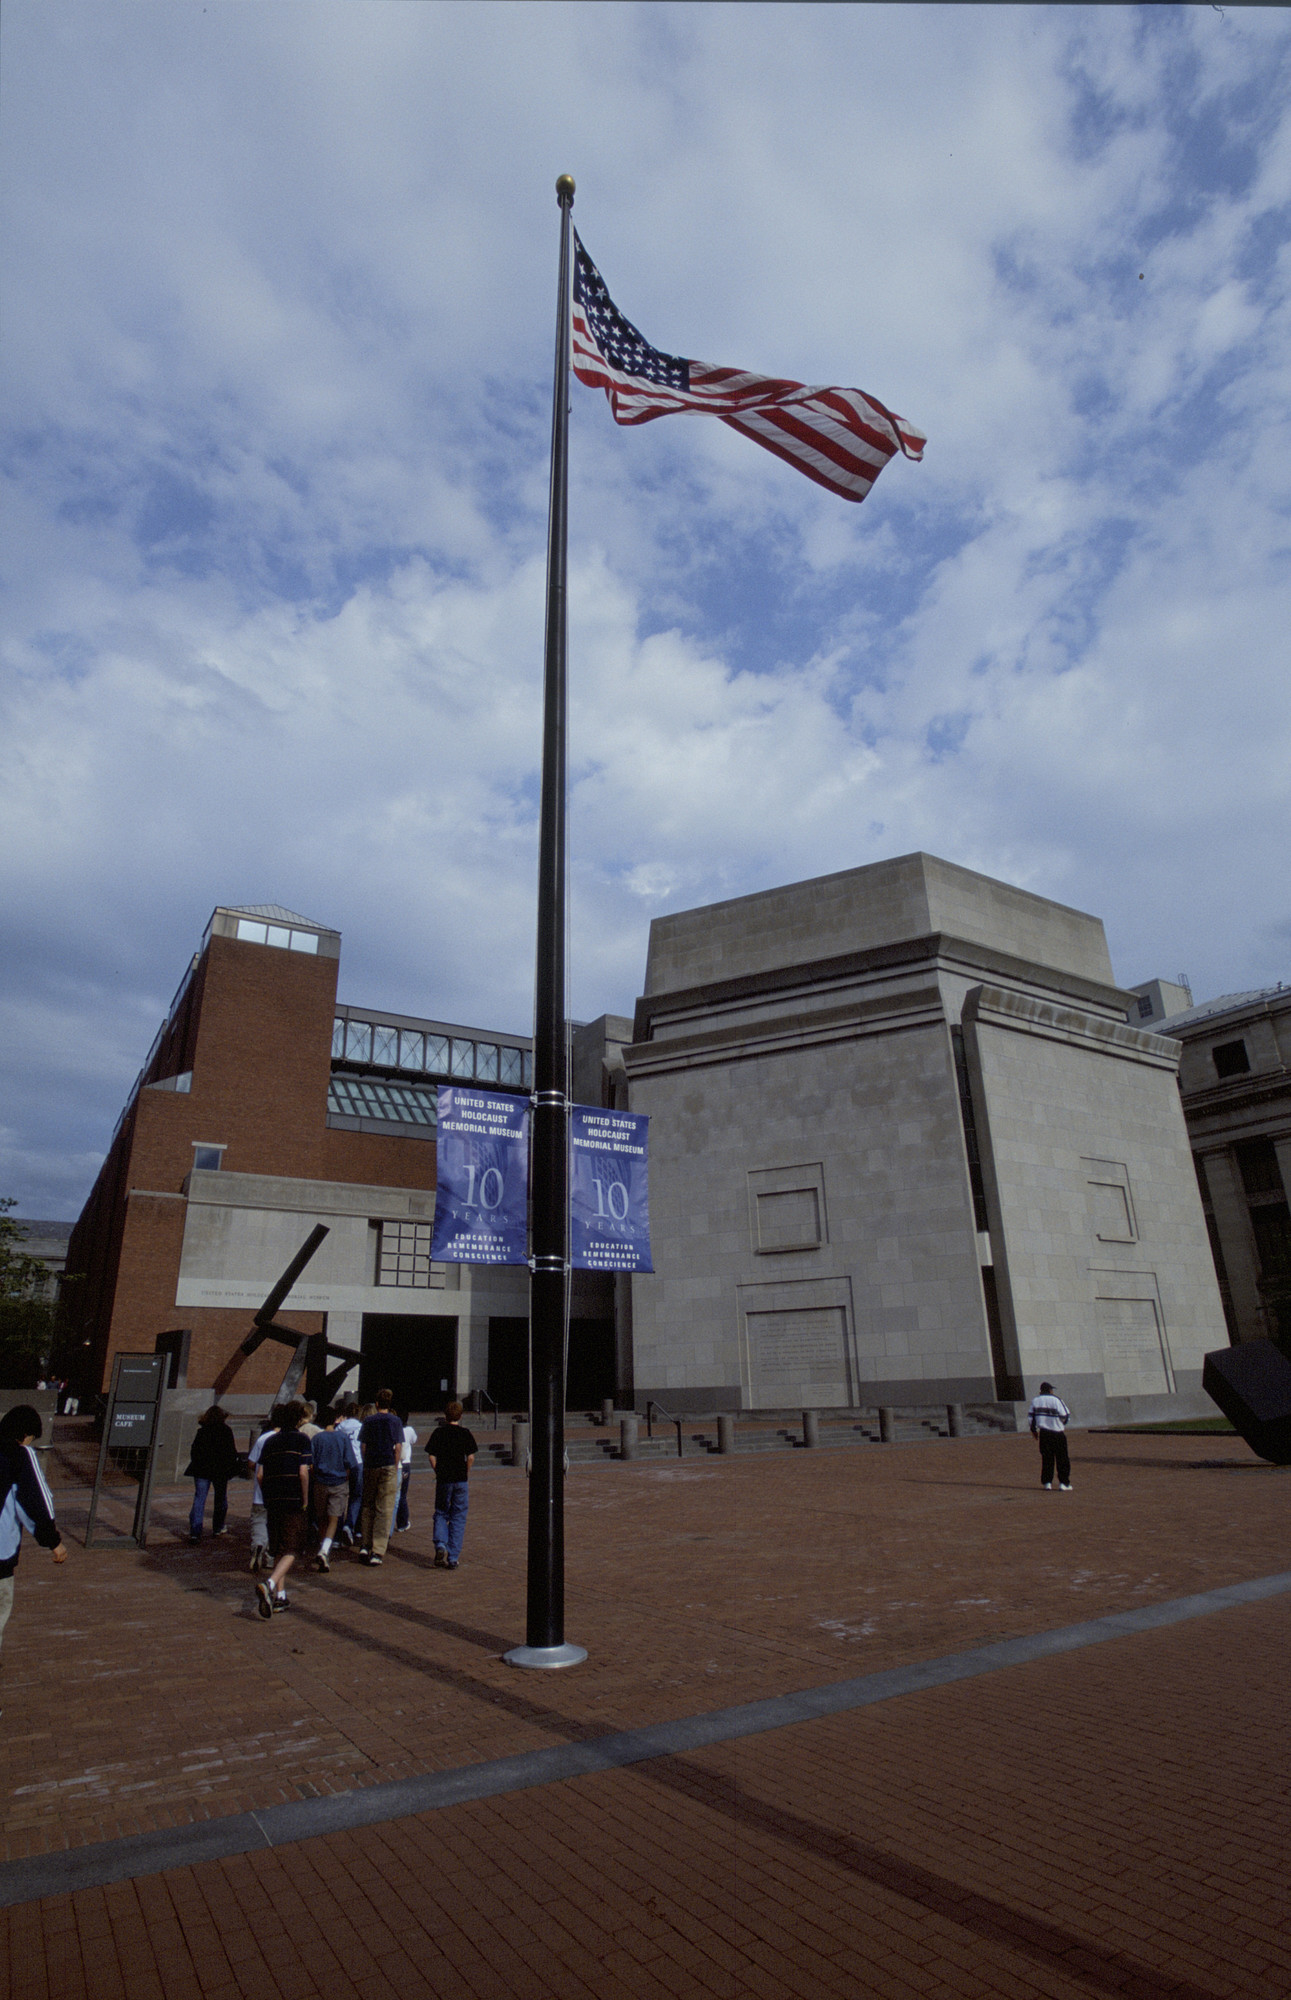 View of Eisenhower Plaza decorated with 10th anniversary banners on the flag pole at the U.S. Holocaust Memorial Museum on the day of its10th anniversary.